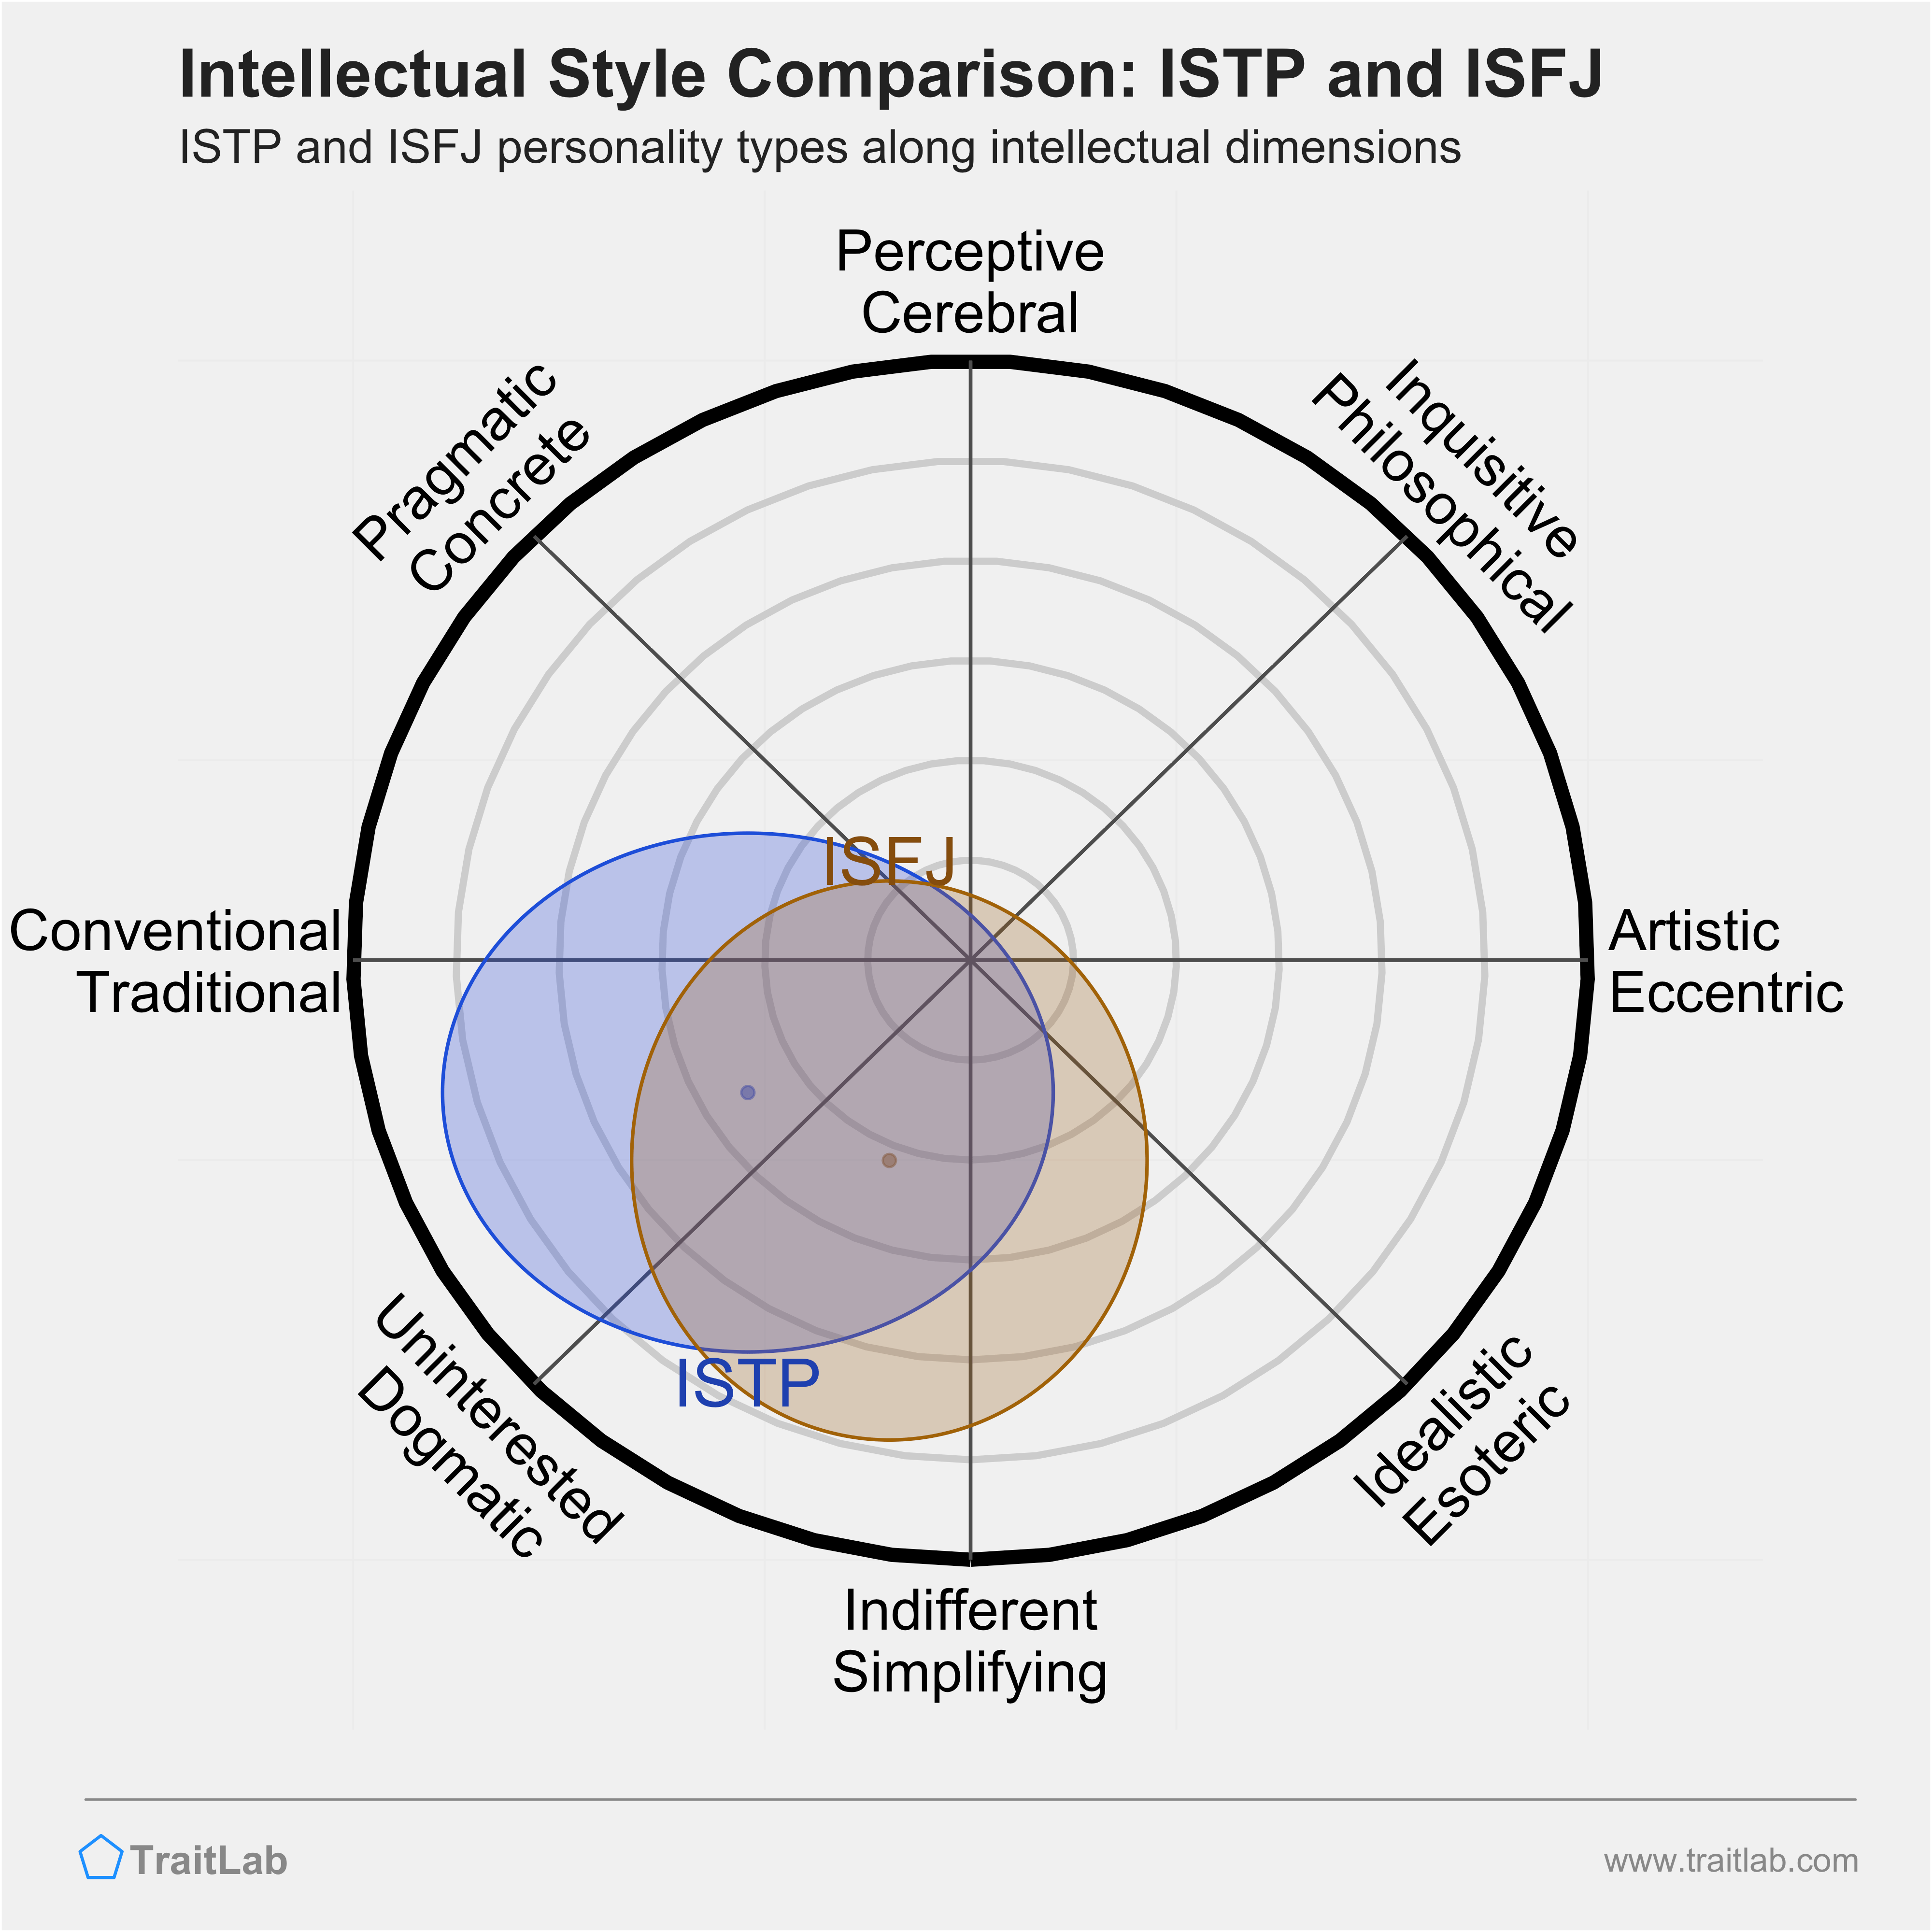 ISTP and ISFJ comparison across intellectual dimensions